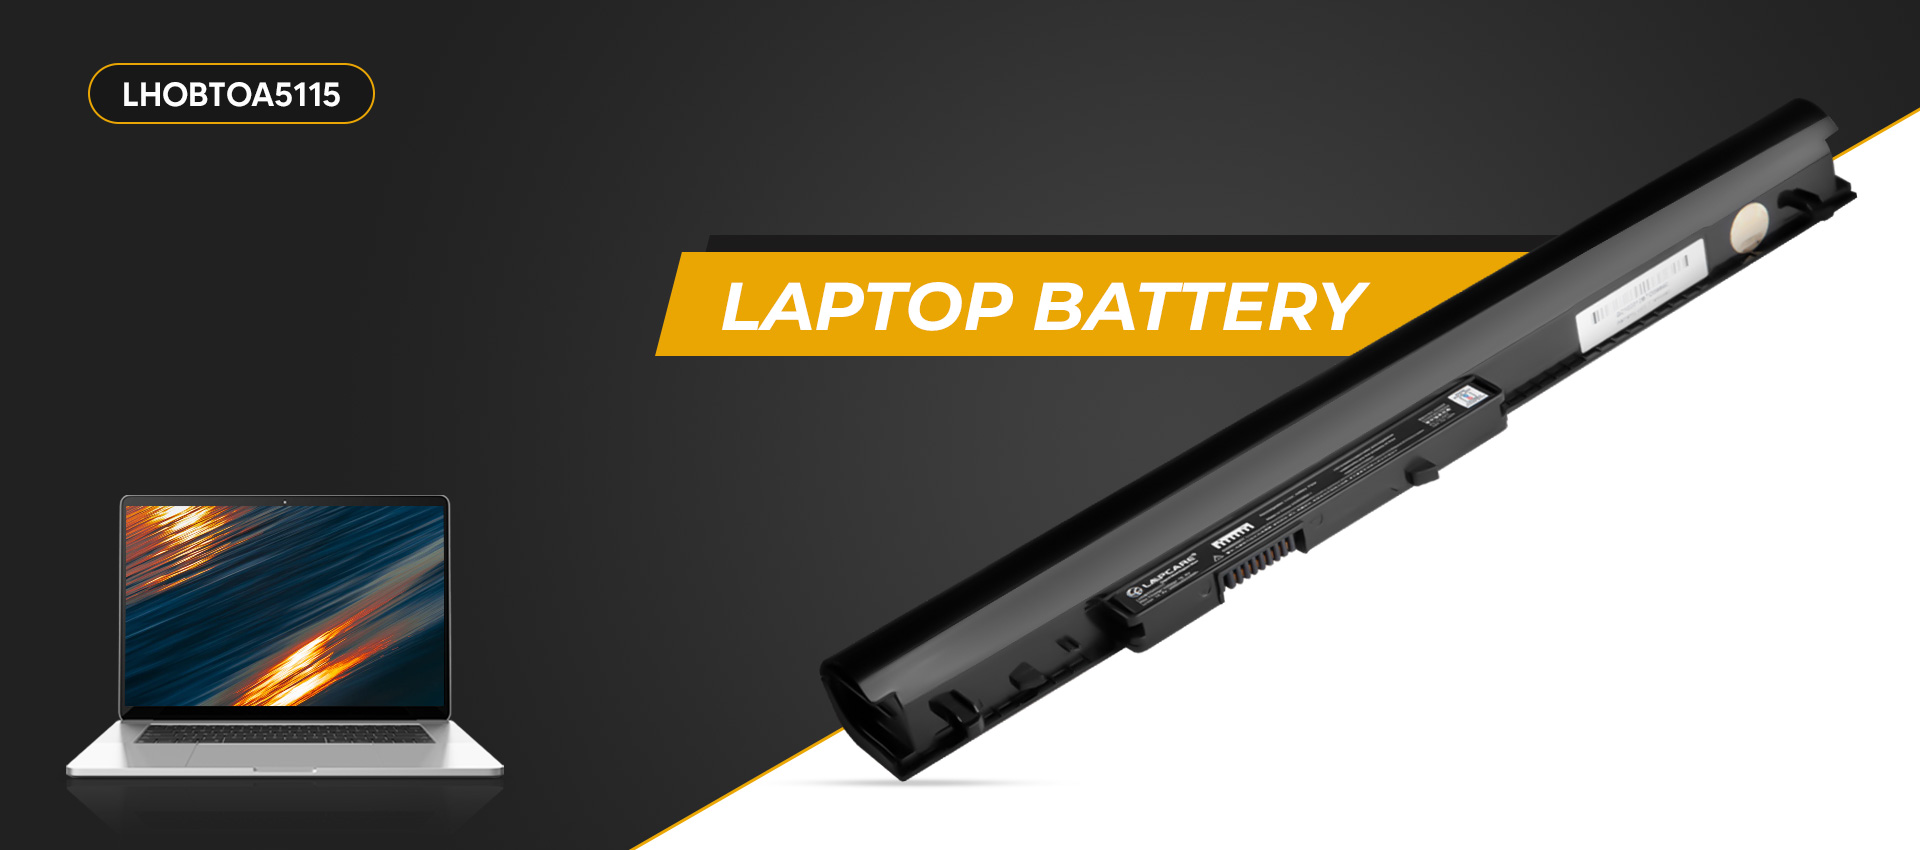 Replacement Laptop Battery for HP Compaq 740715-001 0A04 HSTNN-LB5S Laptop